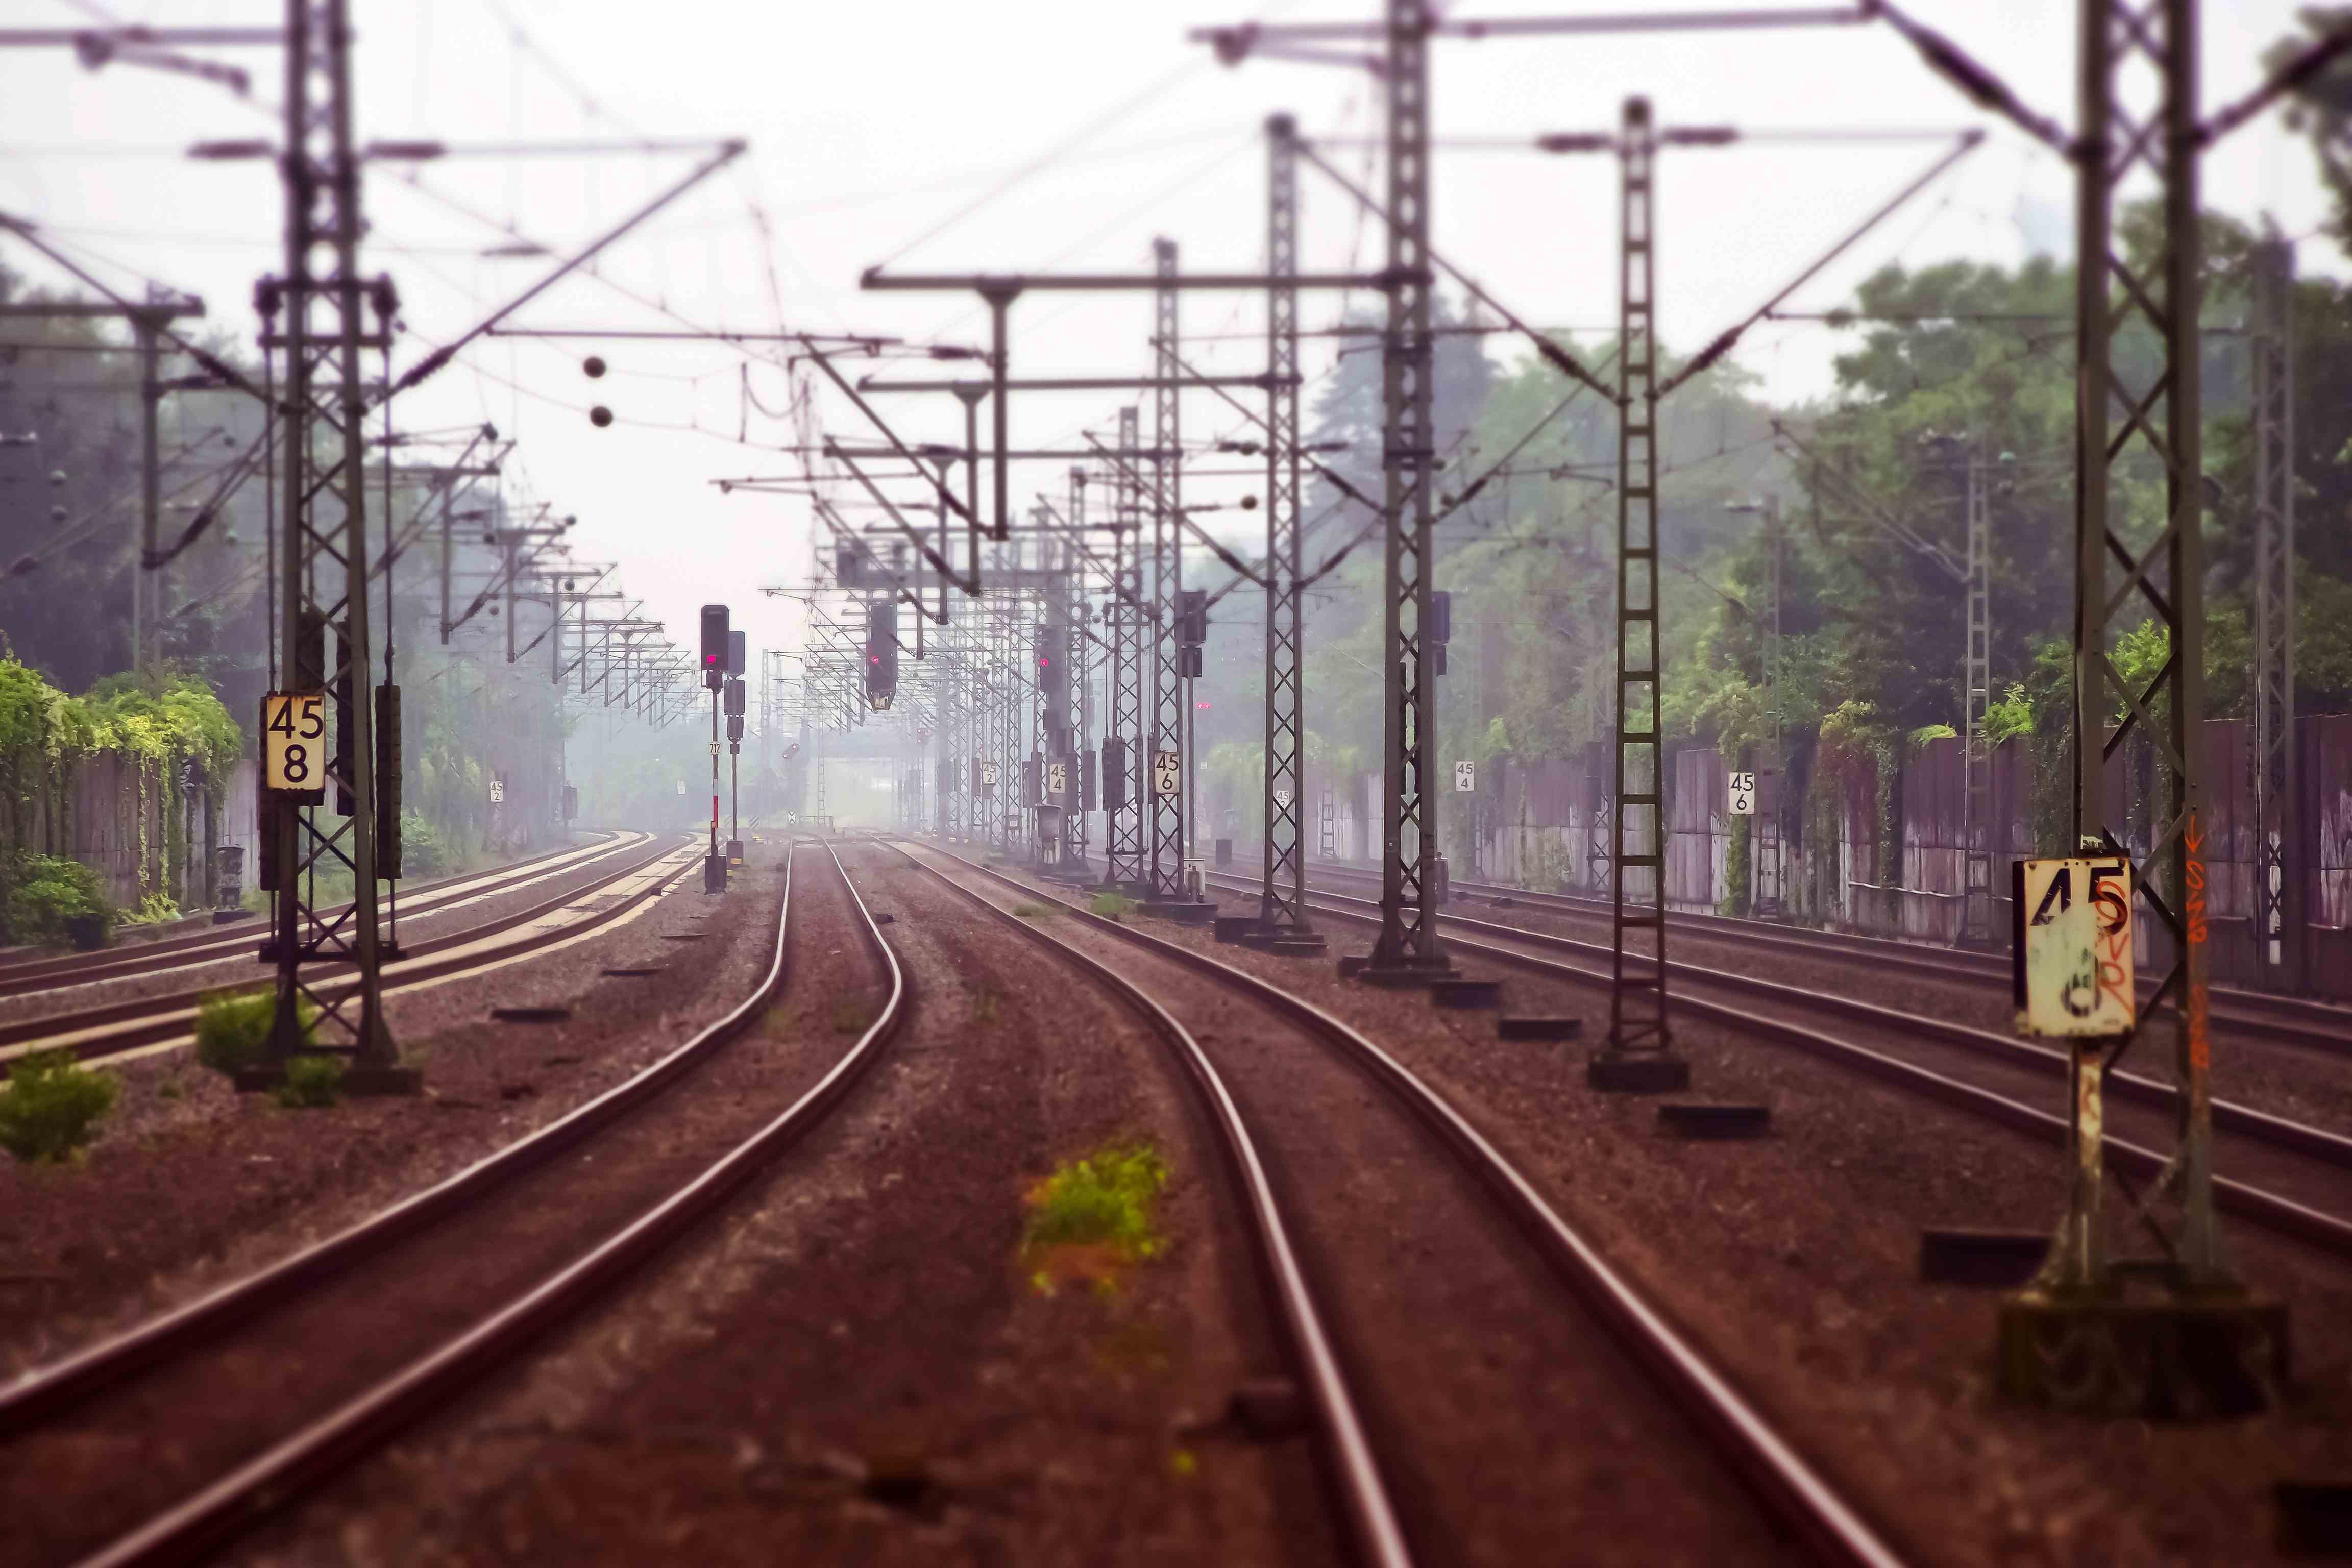 Train track with overhead power)